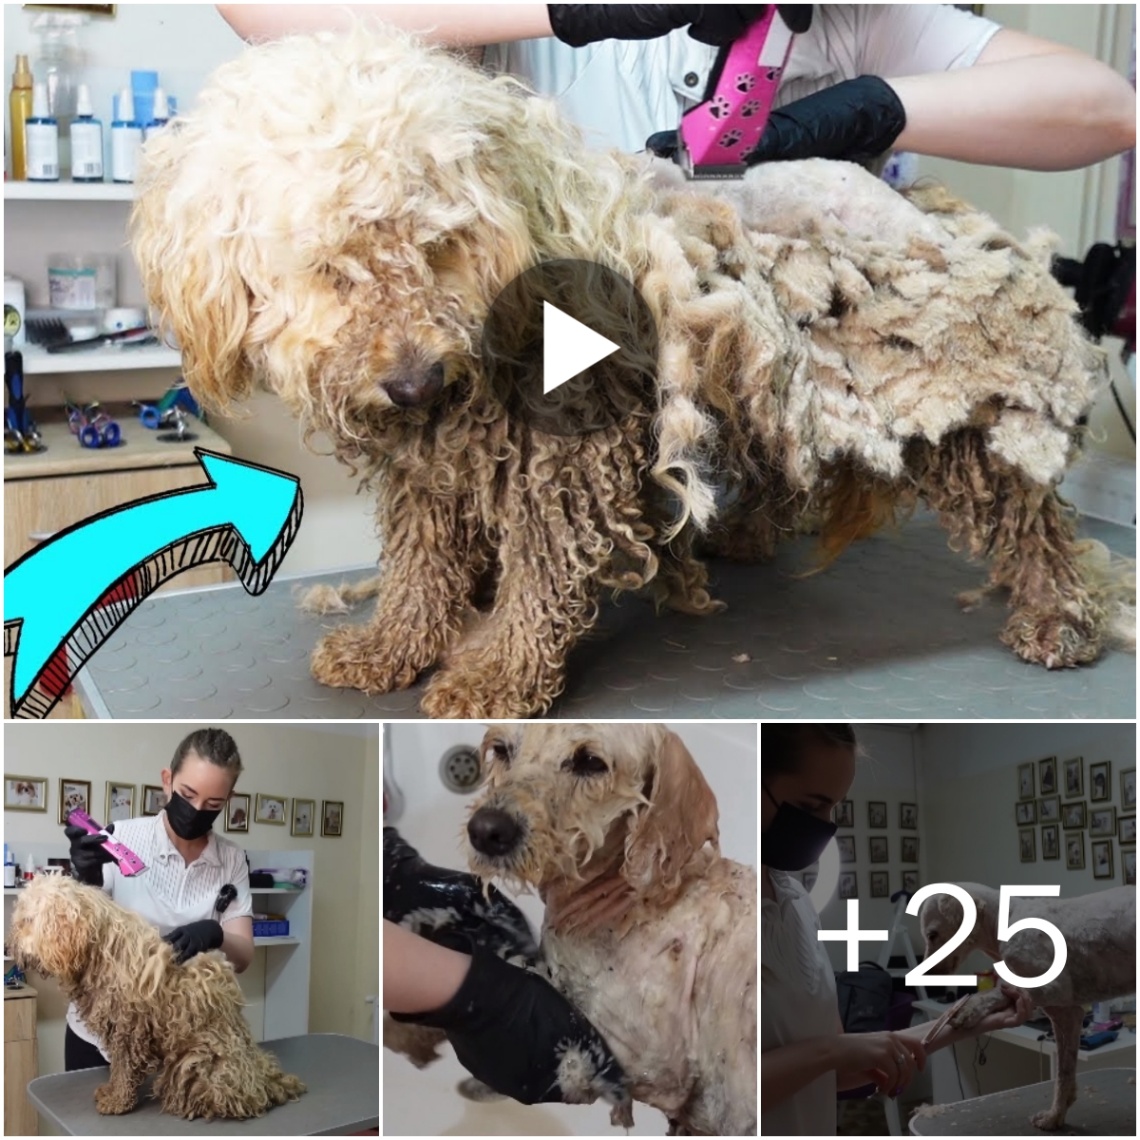 (Video) This Dog Was in Terrible Condition!!! We Found Him at the Cemetery.. a matted dog, her tangled coat mirroring the weight of neglect she’s endured